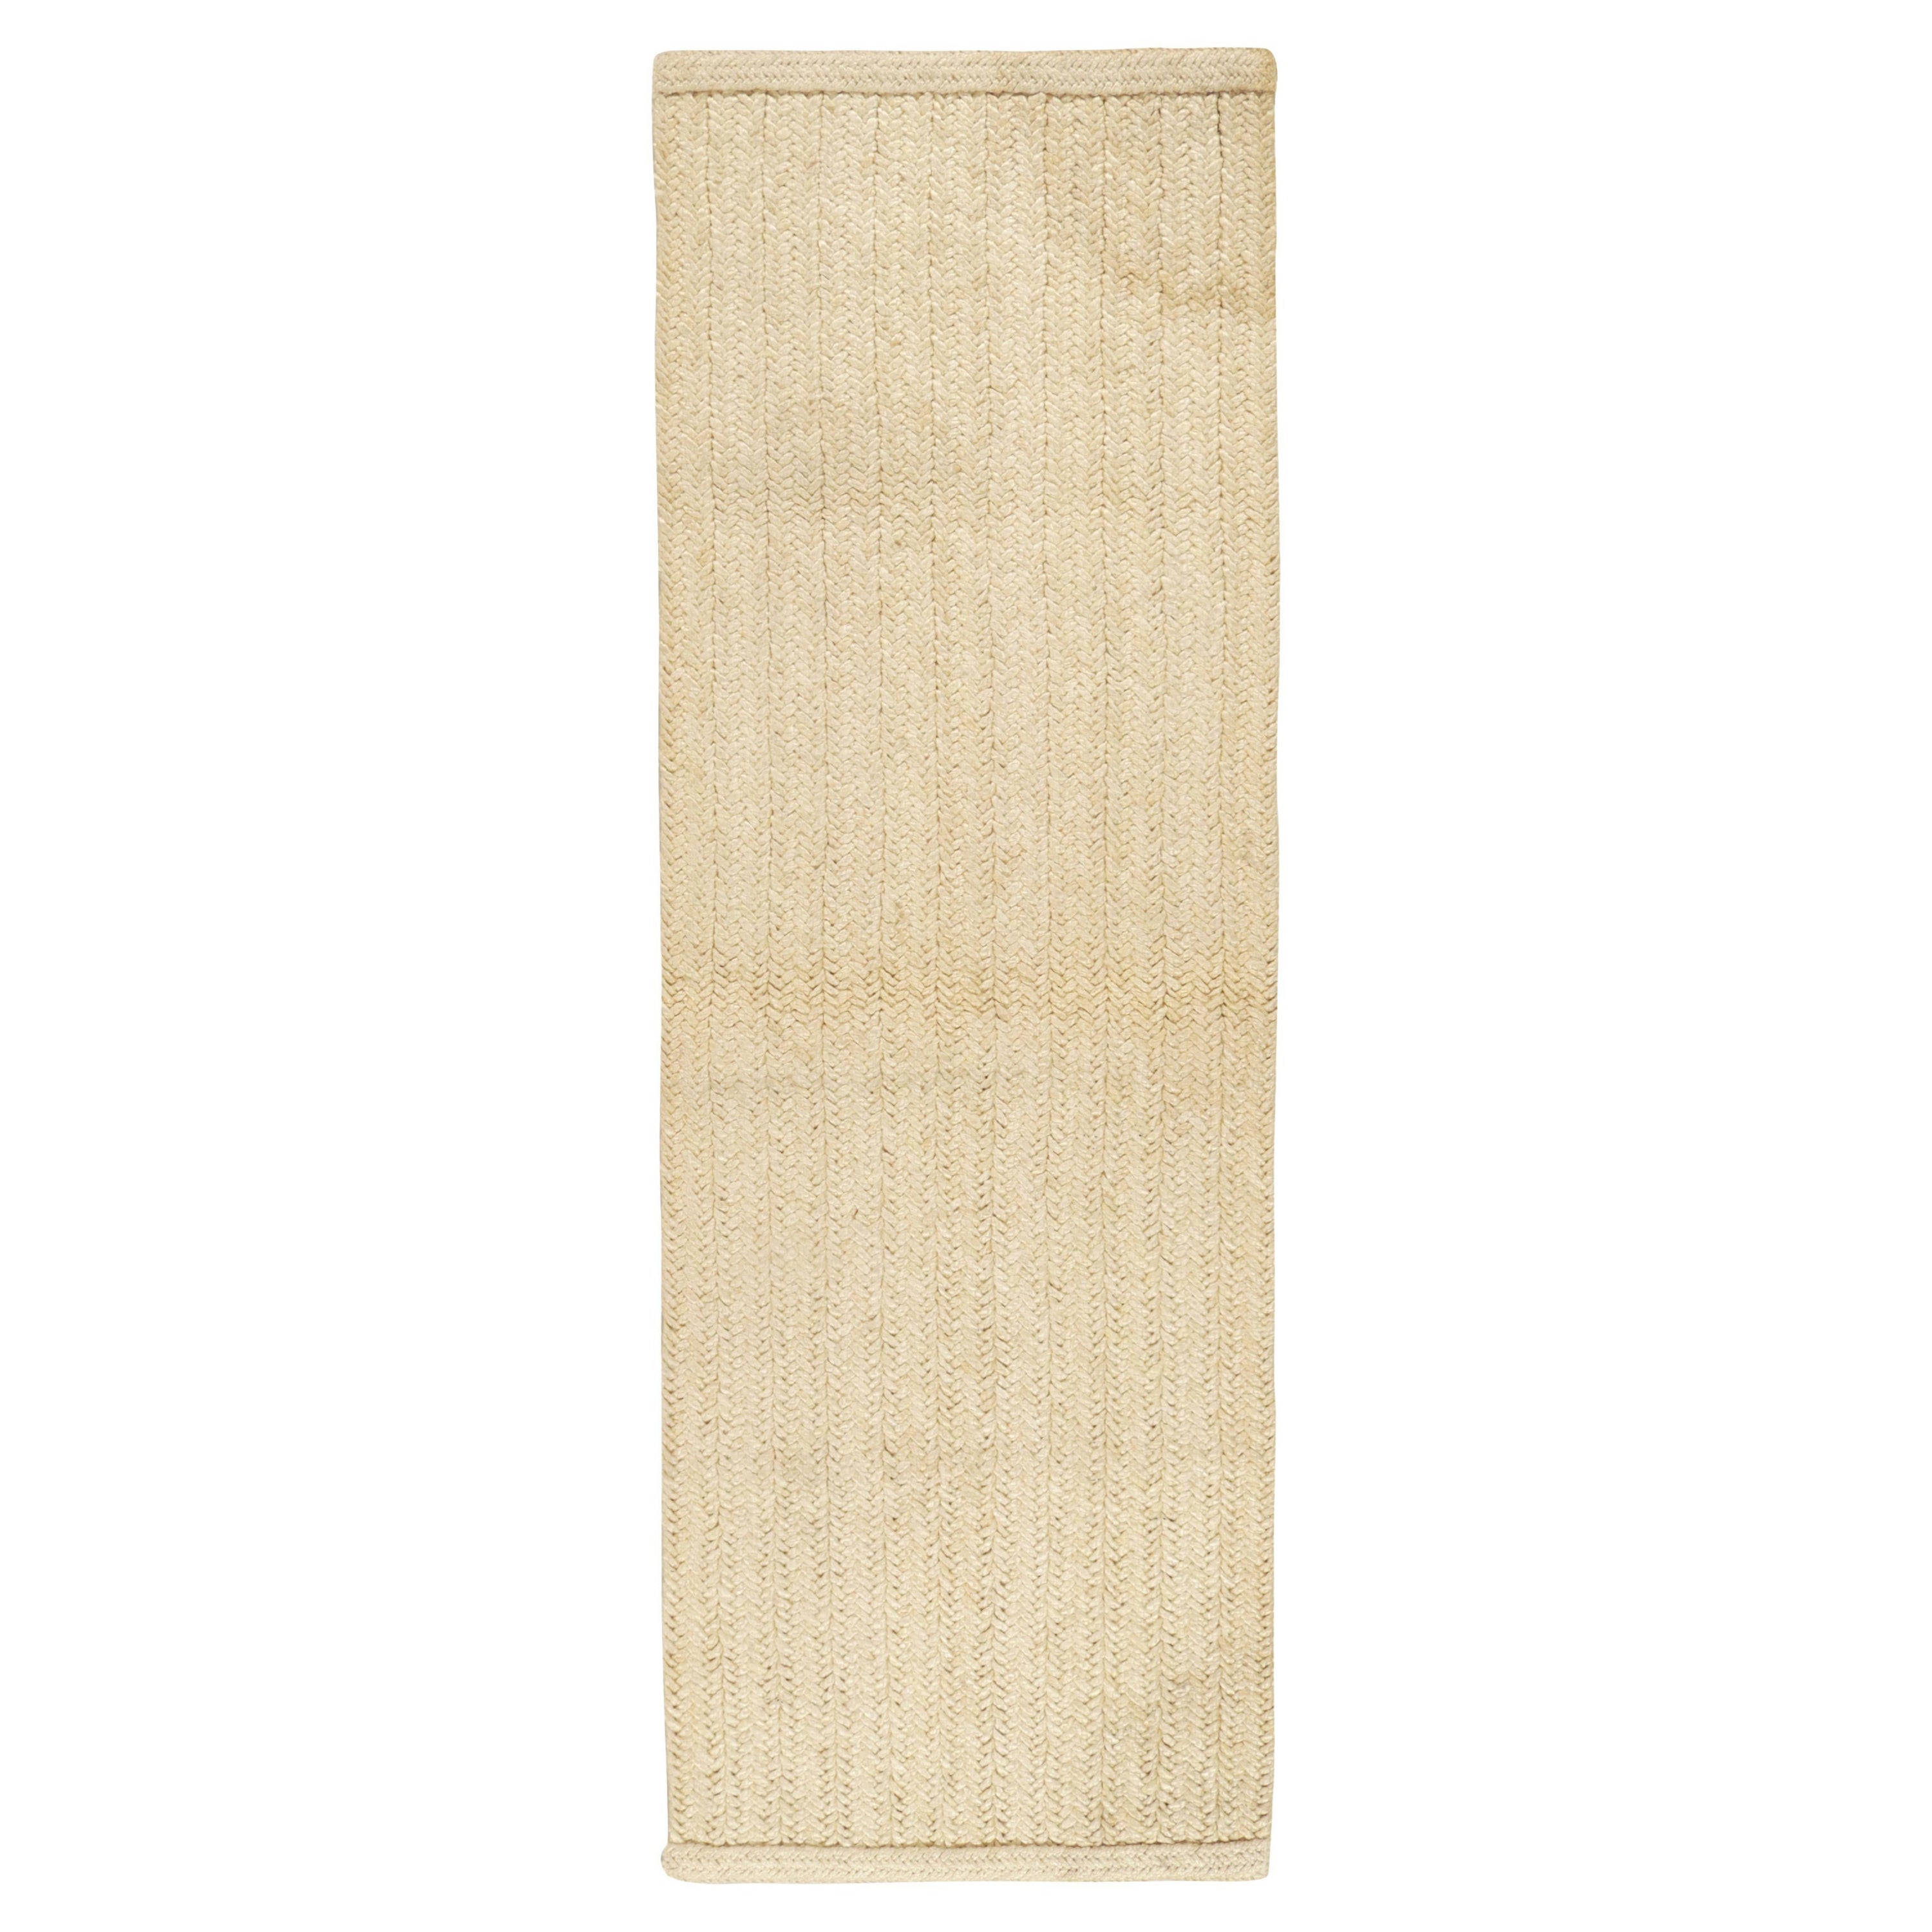 Rug & Kilim's Contemporary Braided Runner in off White